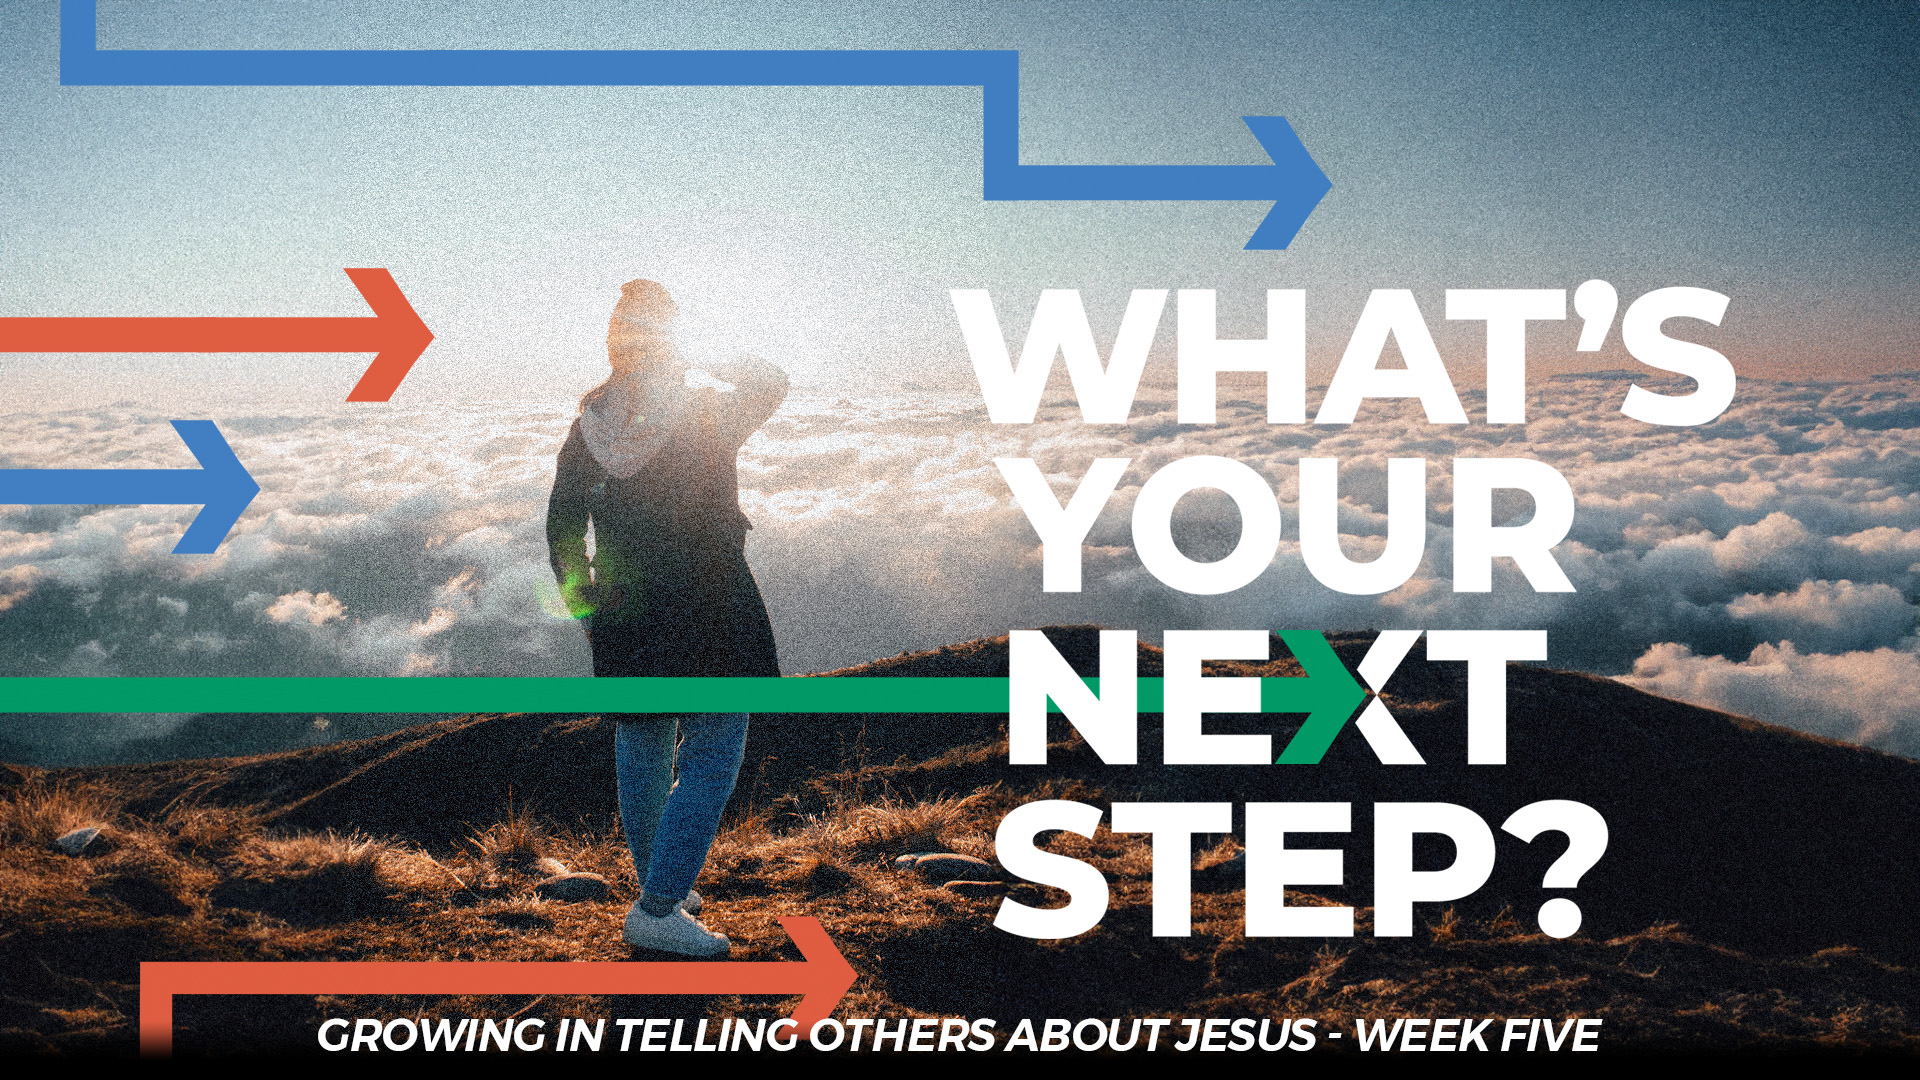 Growing in Telling Others about Jesus - Week Five